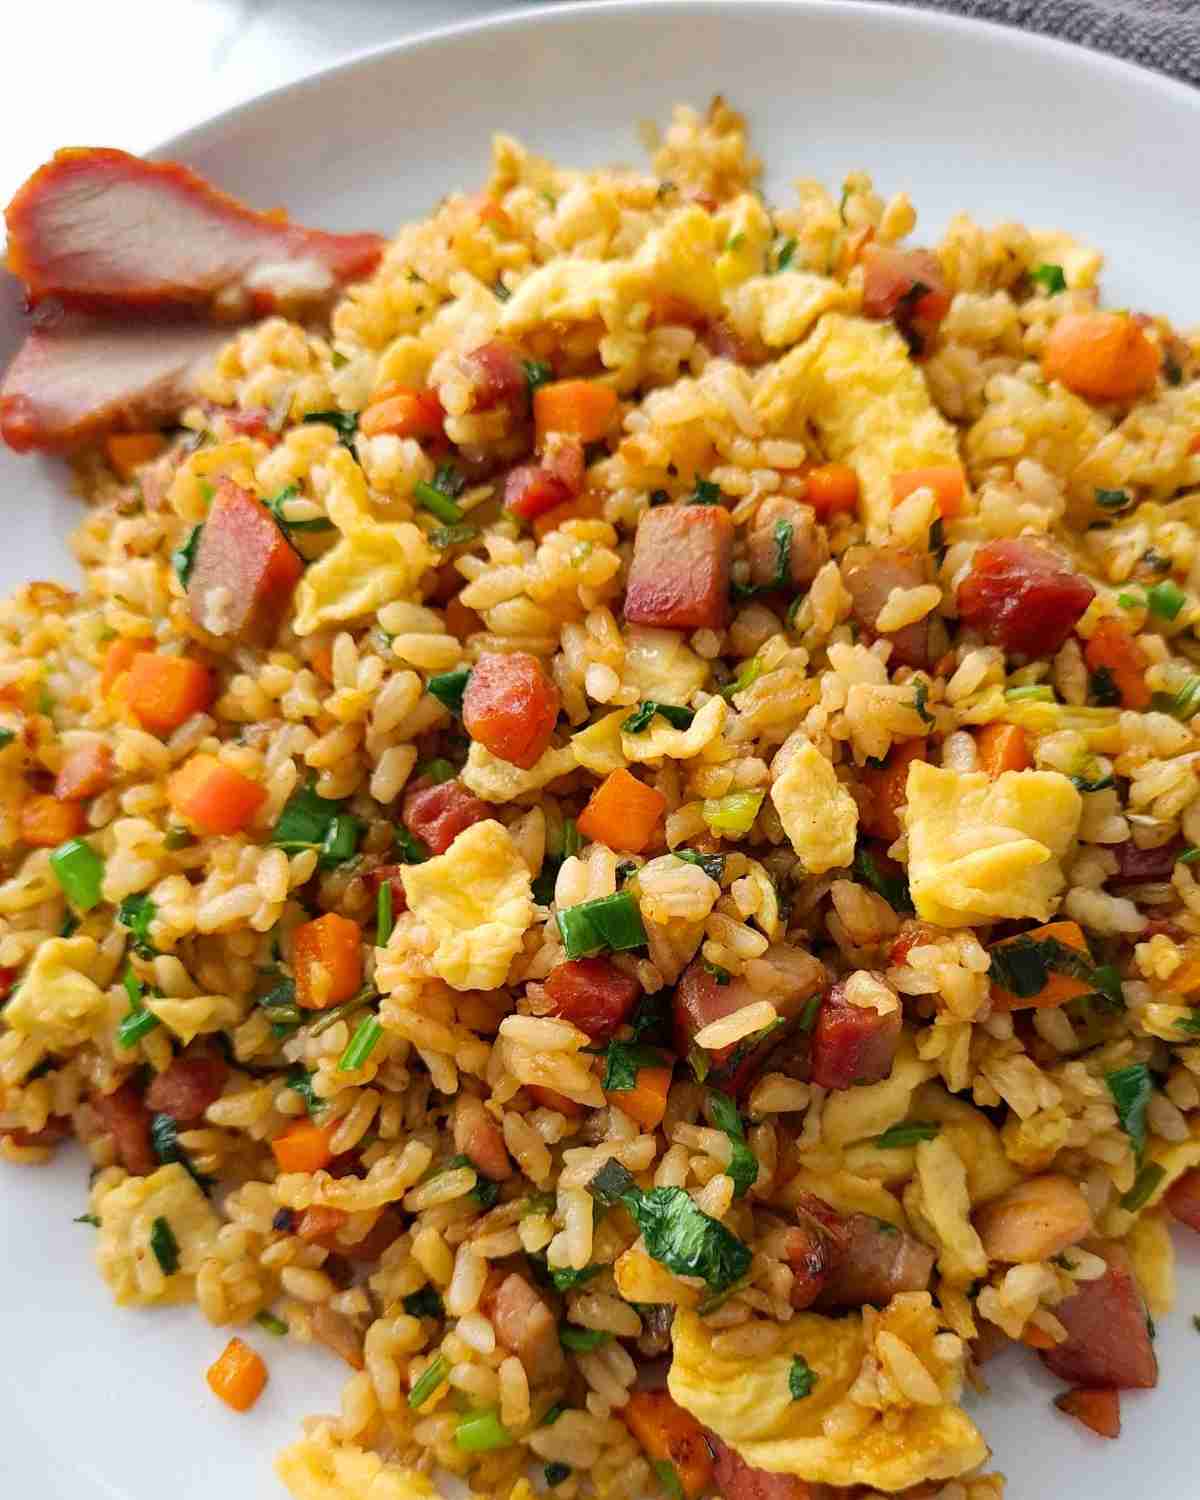 A plate of fried rice with a focus on BBQ pork pieces and golden eggs